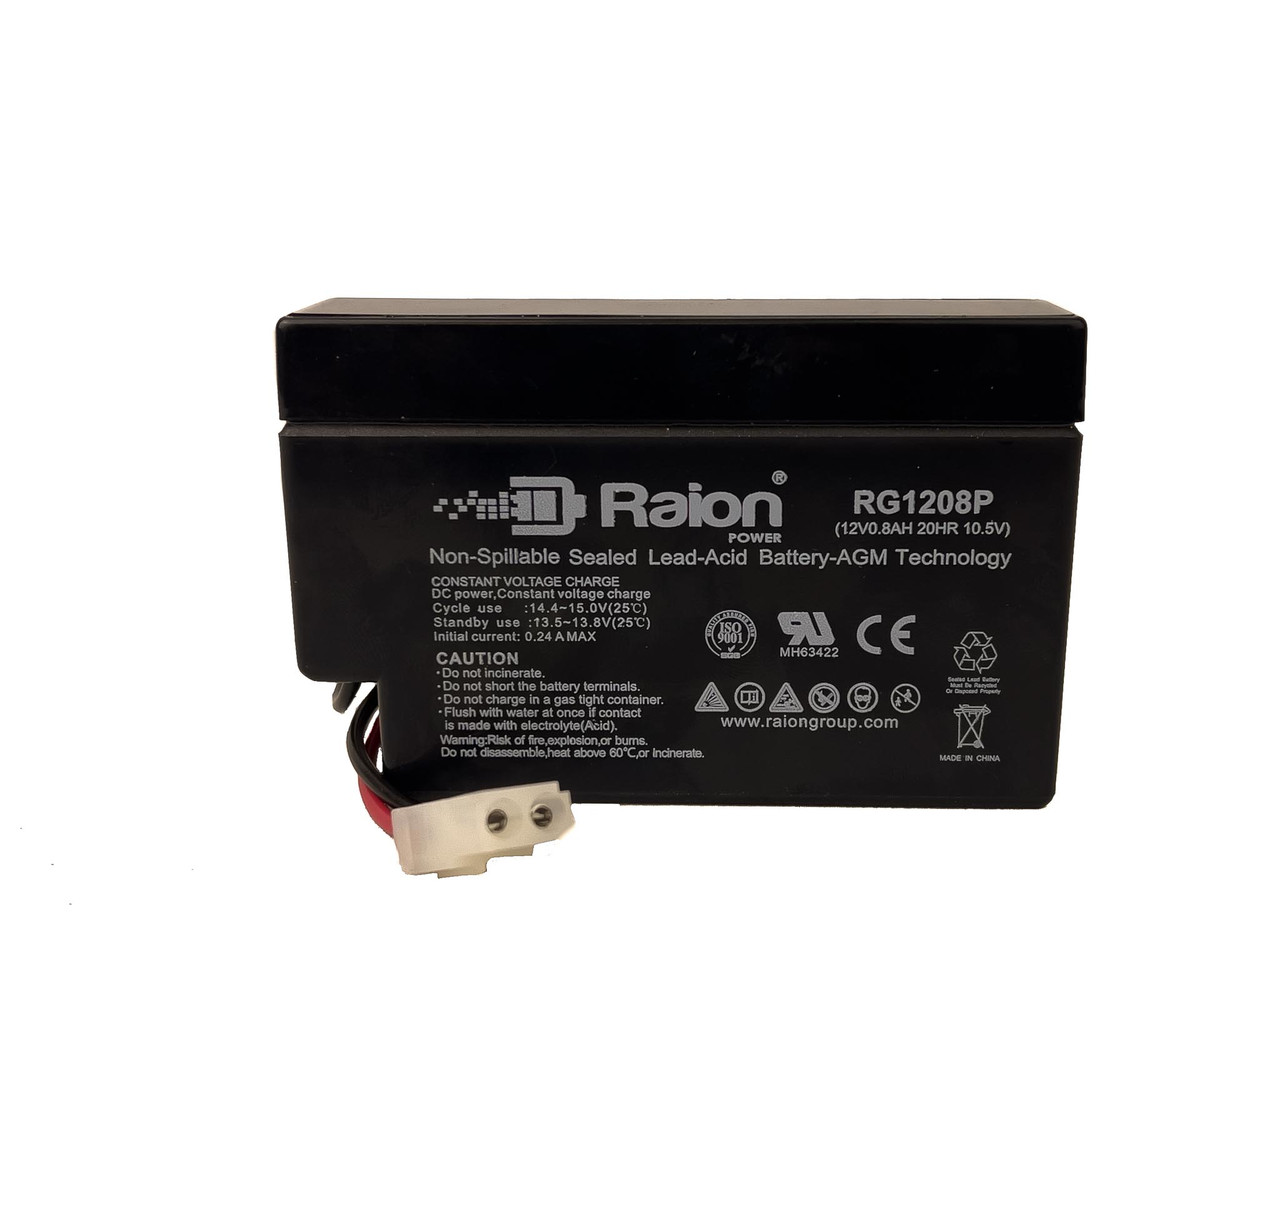 Raion Power 12V 0.8Ah SLA Battery With T1 Terminals For LiftMaster O2-K29NP0812 garage door